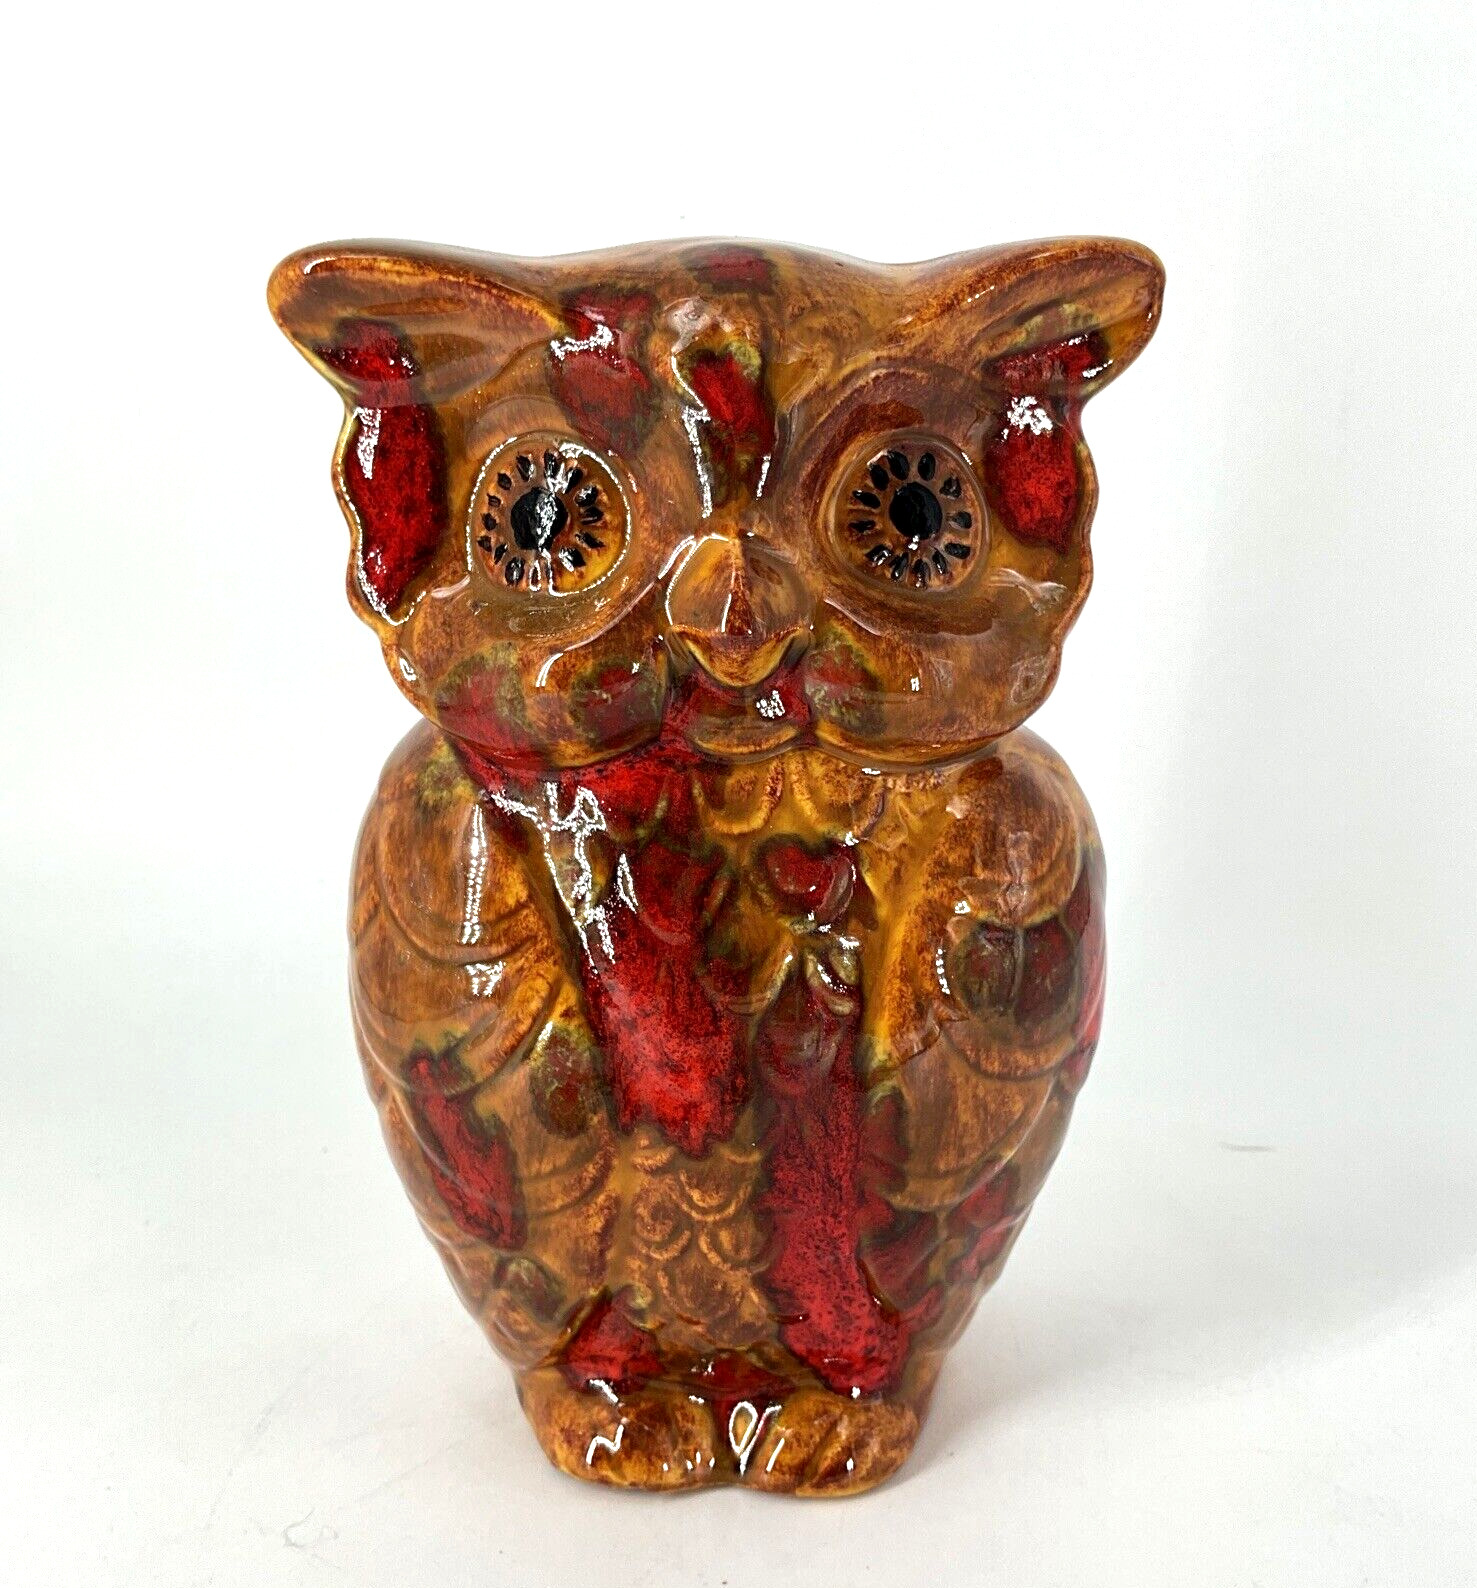 Vintage 70s ceramic OWL Coin Bank red brown groovy glaze